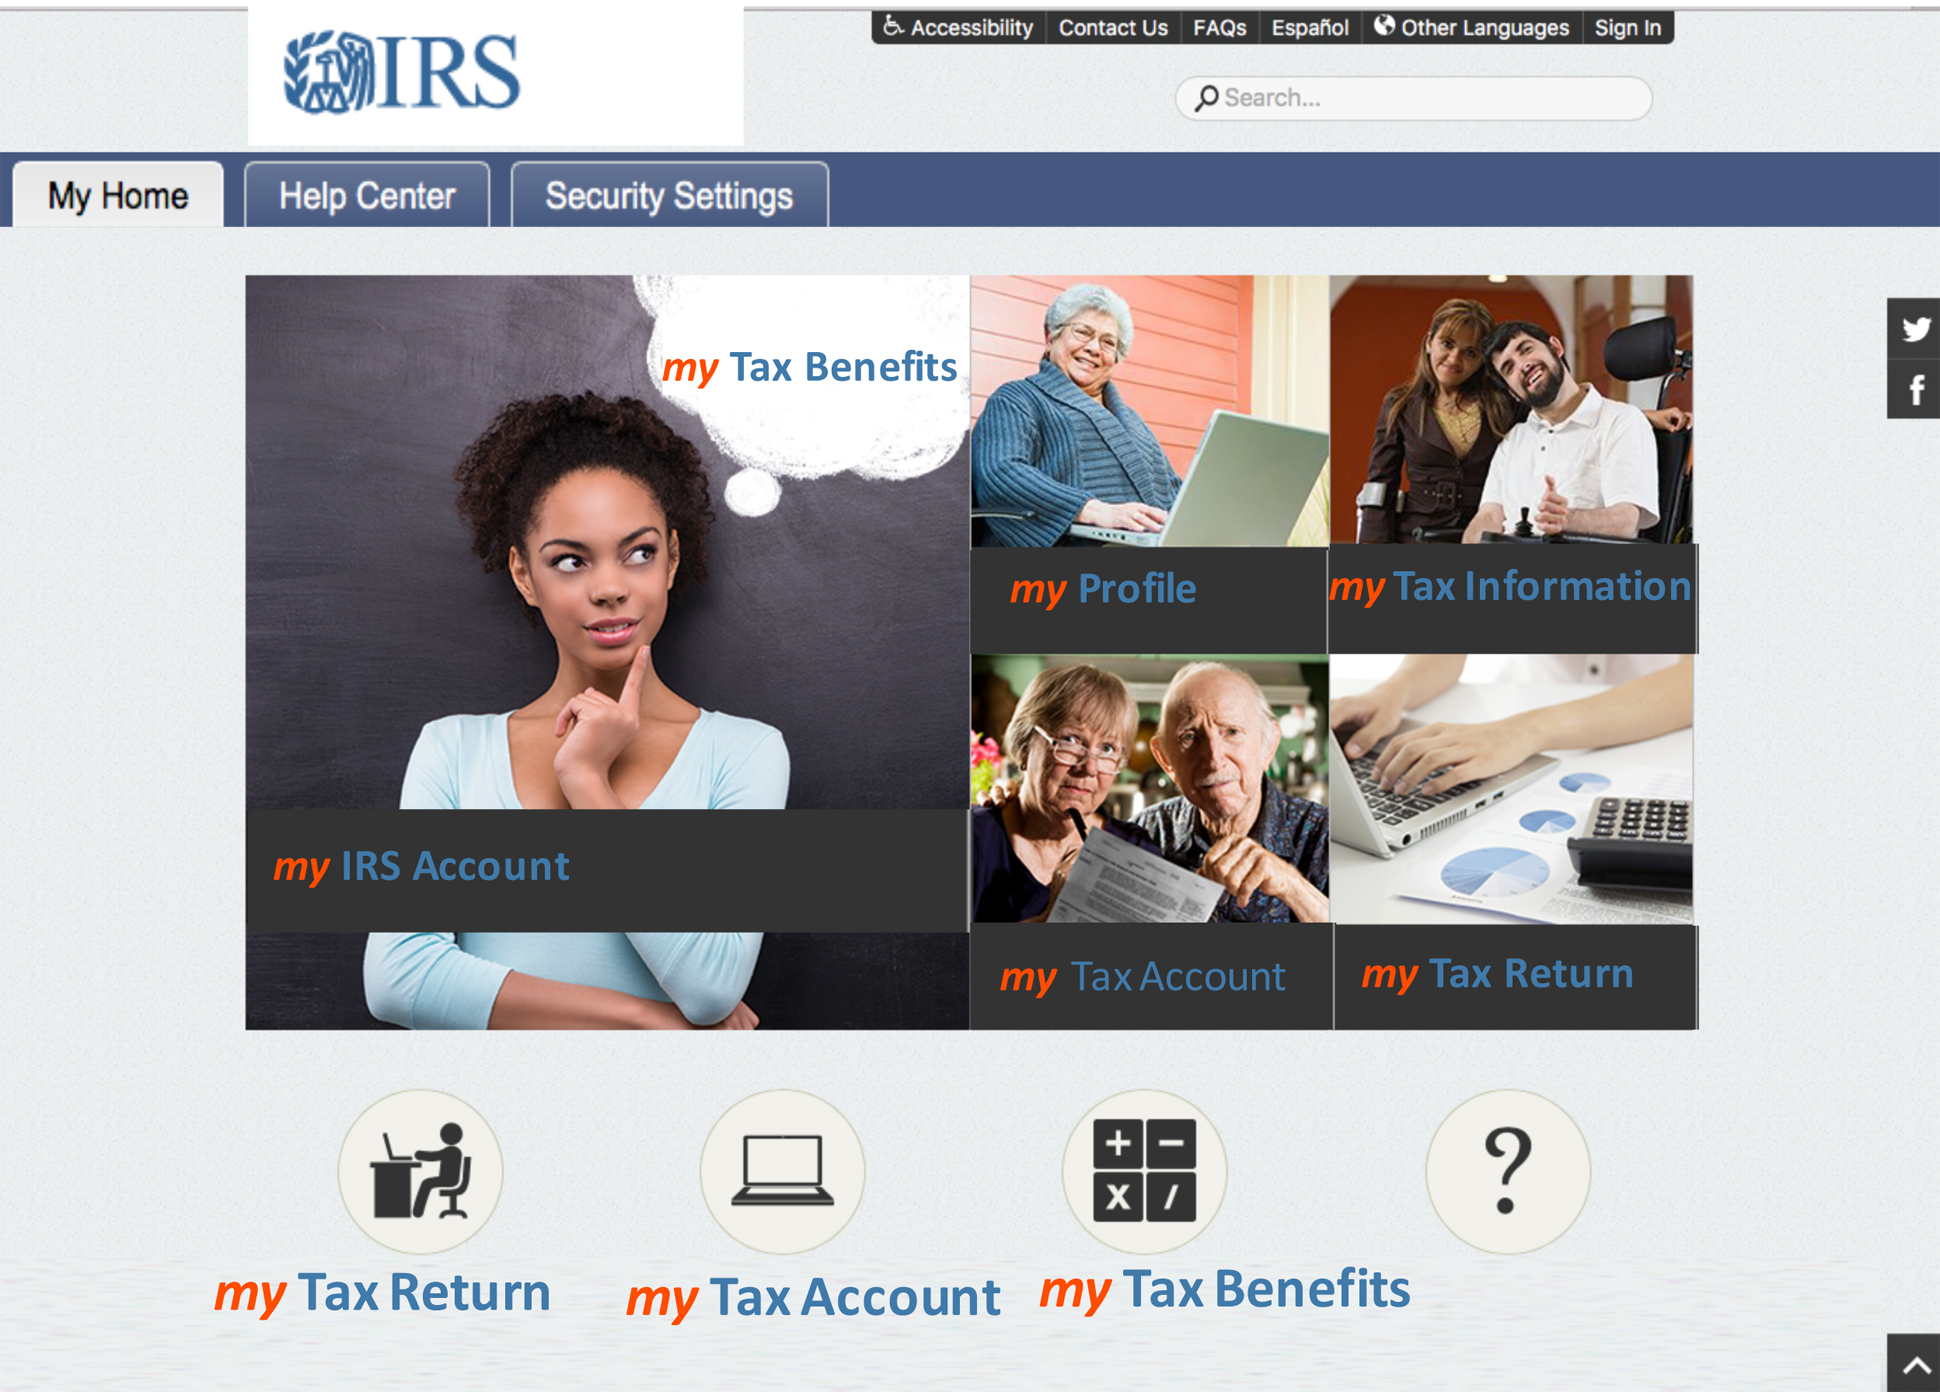 A page from a tax design challenge submission. The dashboard has links to the IRS account, profile, tax account, tax information, and tax return.